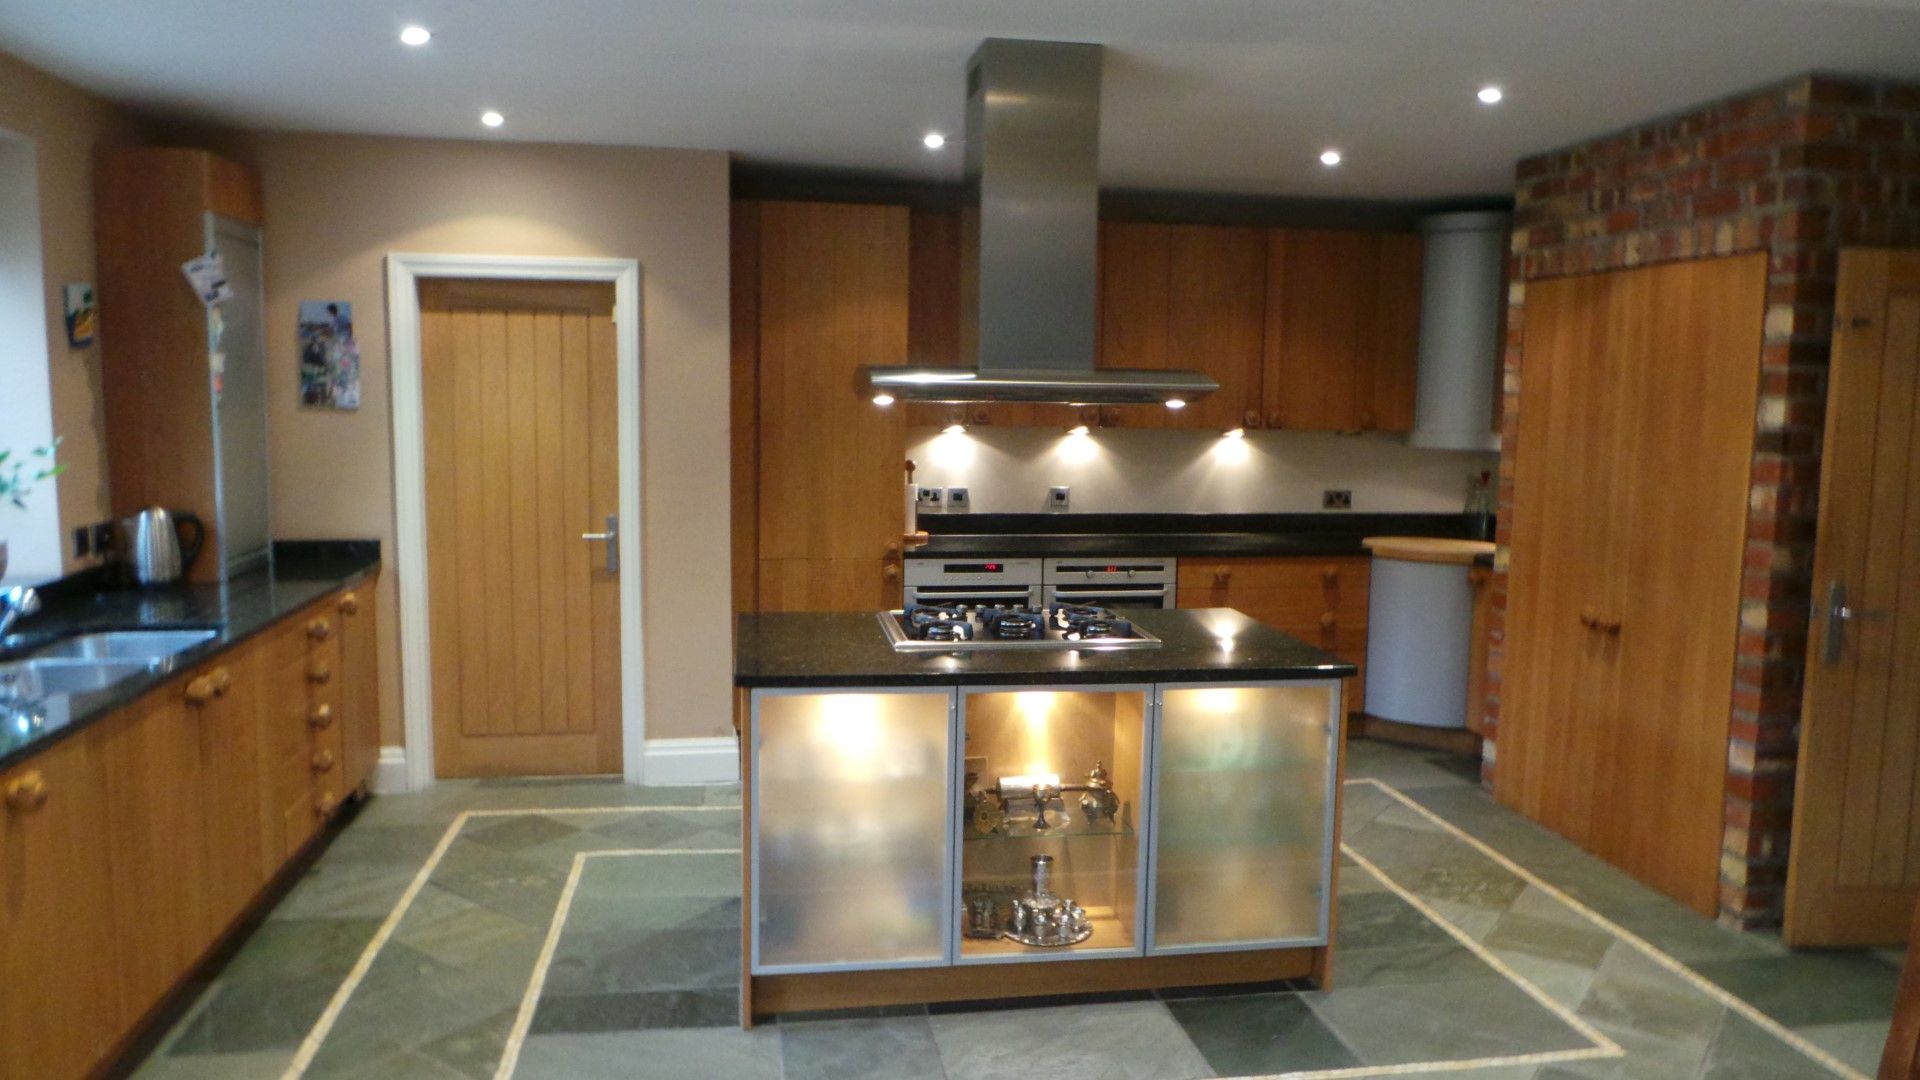 1 x Beautifully Crafted Bespoke Johnson & Johnson Fitted Kitchen - Rustic Solid Oak Doors, Modern - Image 5 of 86